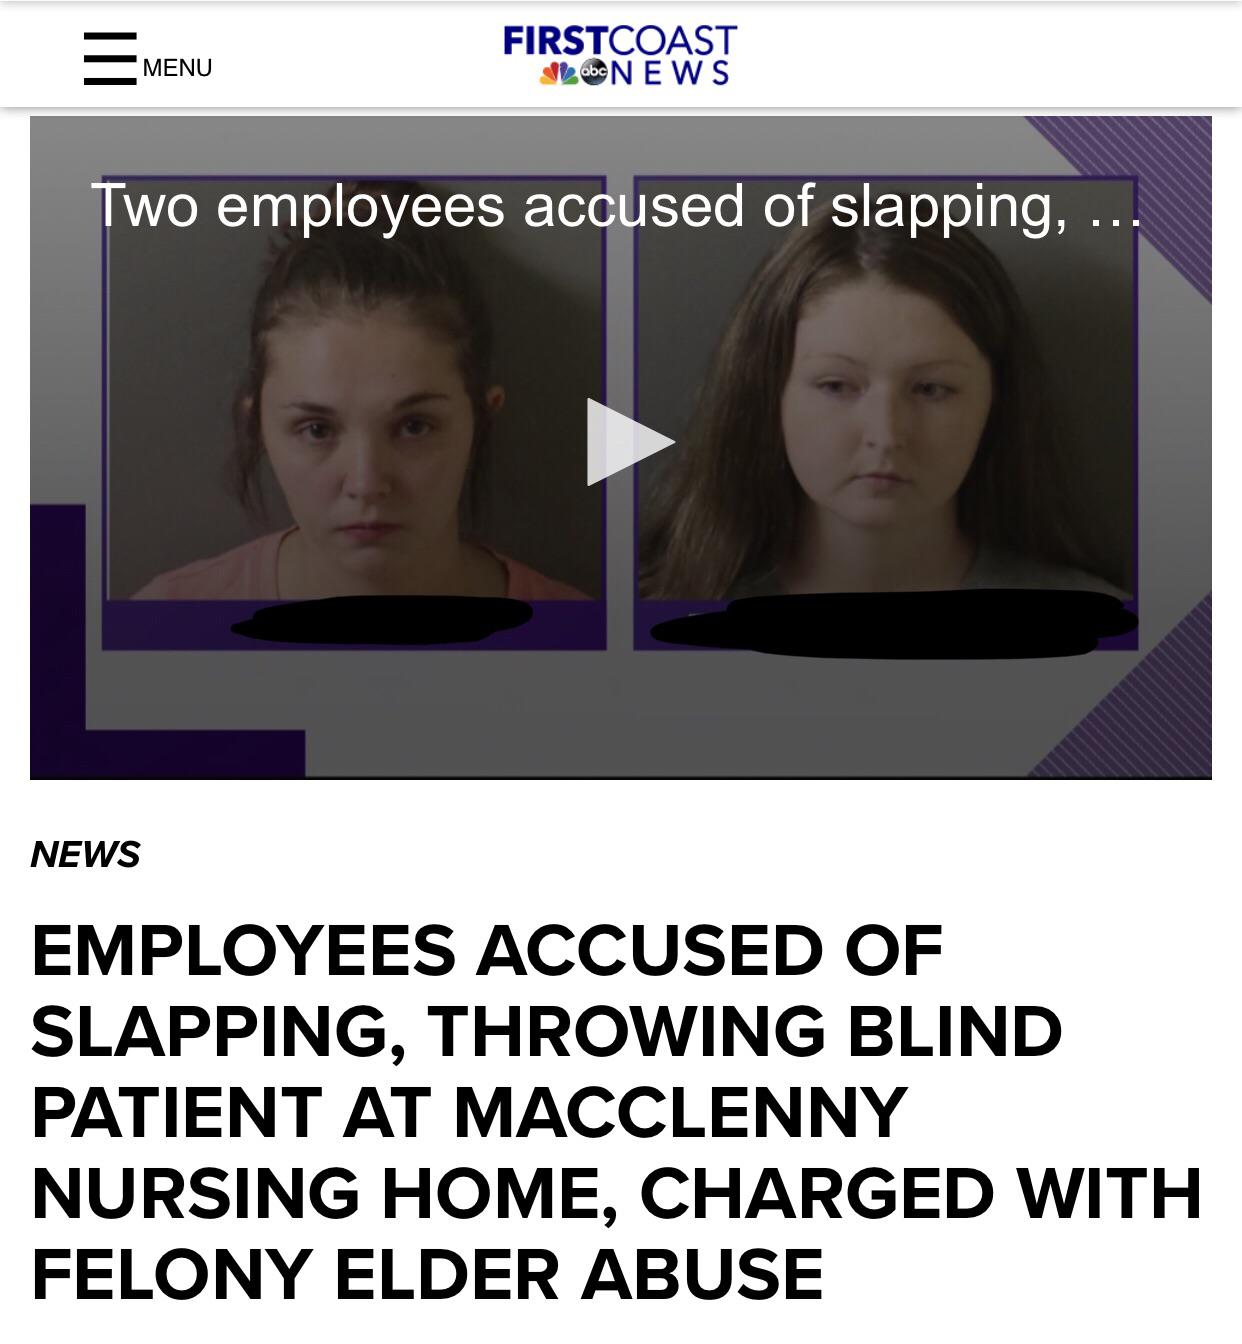 employees must wash hands sign - Menu Firstcoast me aboN Ews Two employees accused of slapping, ... News Employees Accused Of Slapping, Throwing Blind Patient At Macclenny Nursing Home, Charged With Felony Elder Abuse